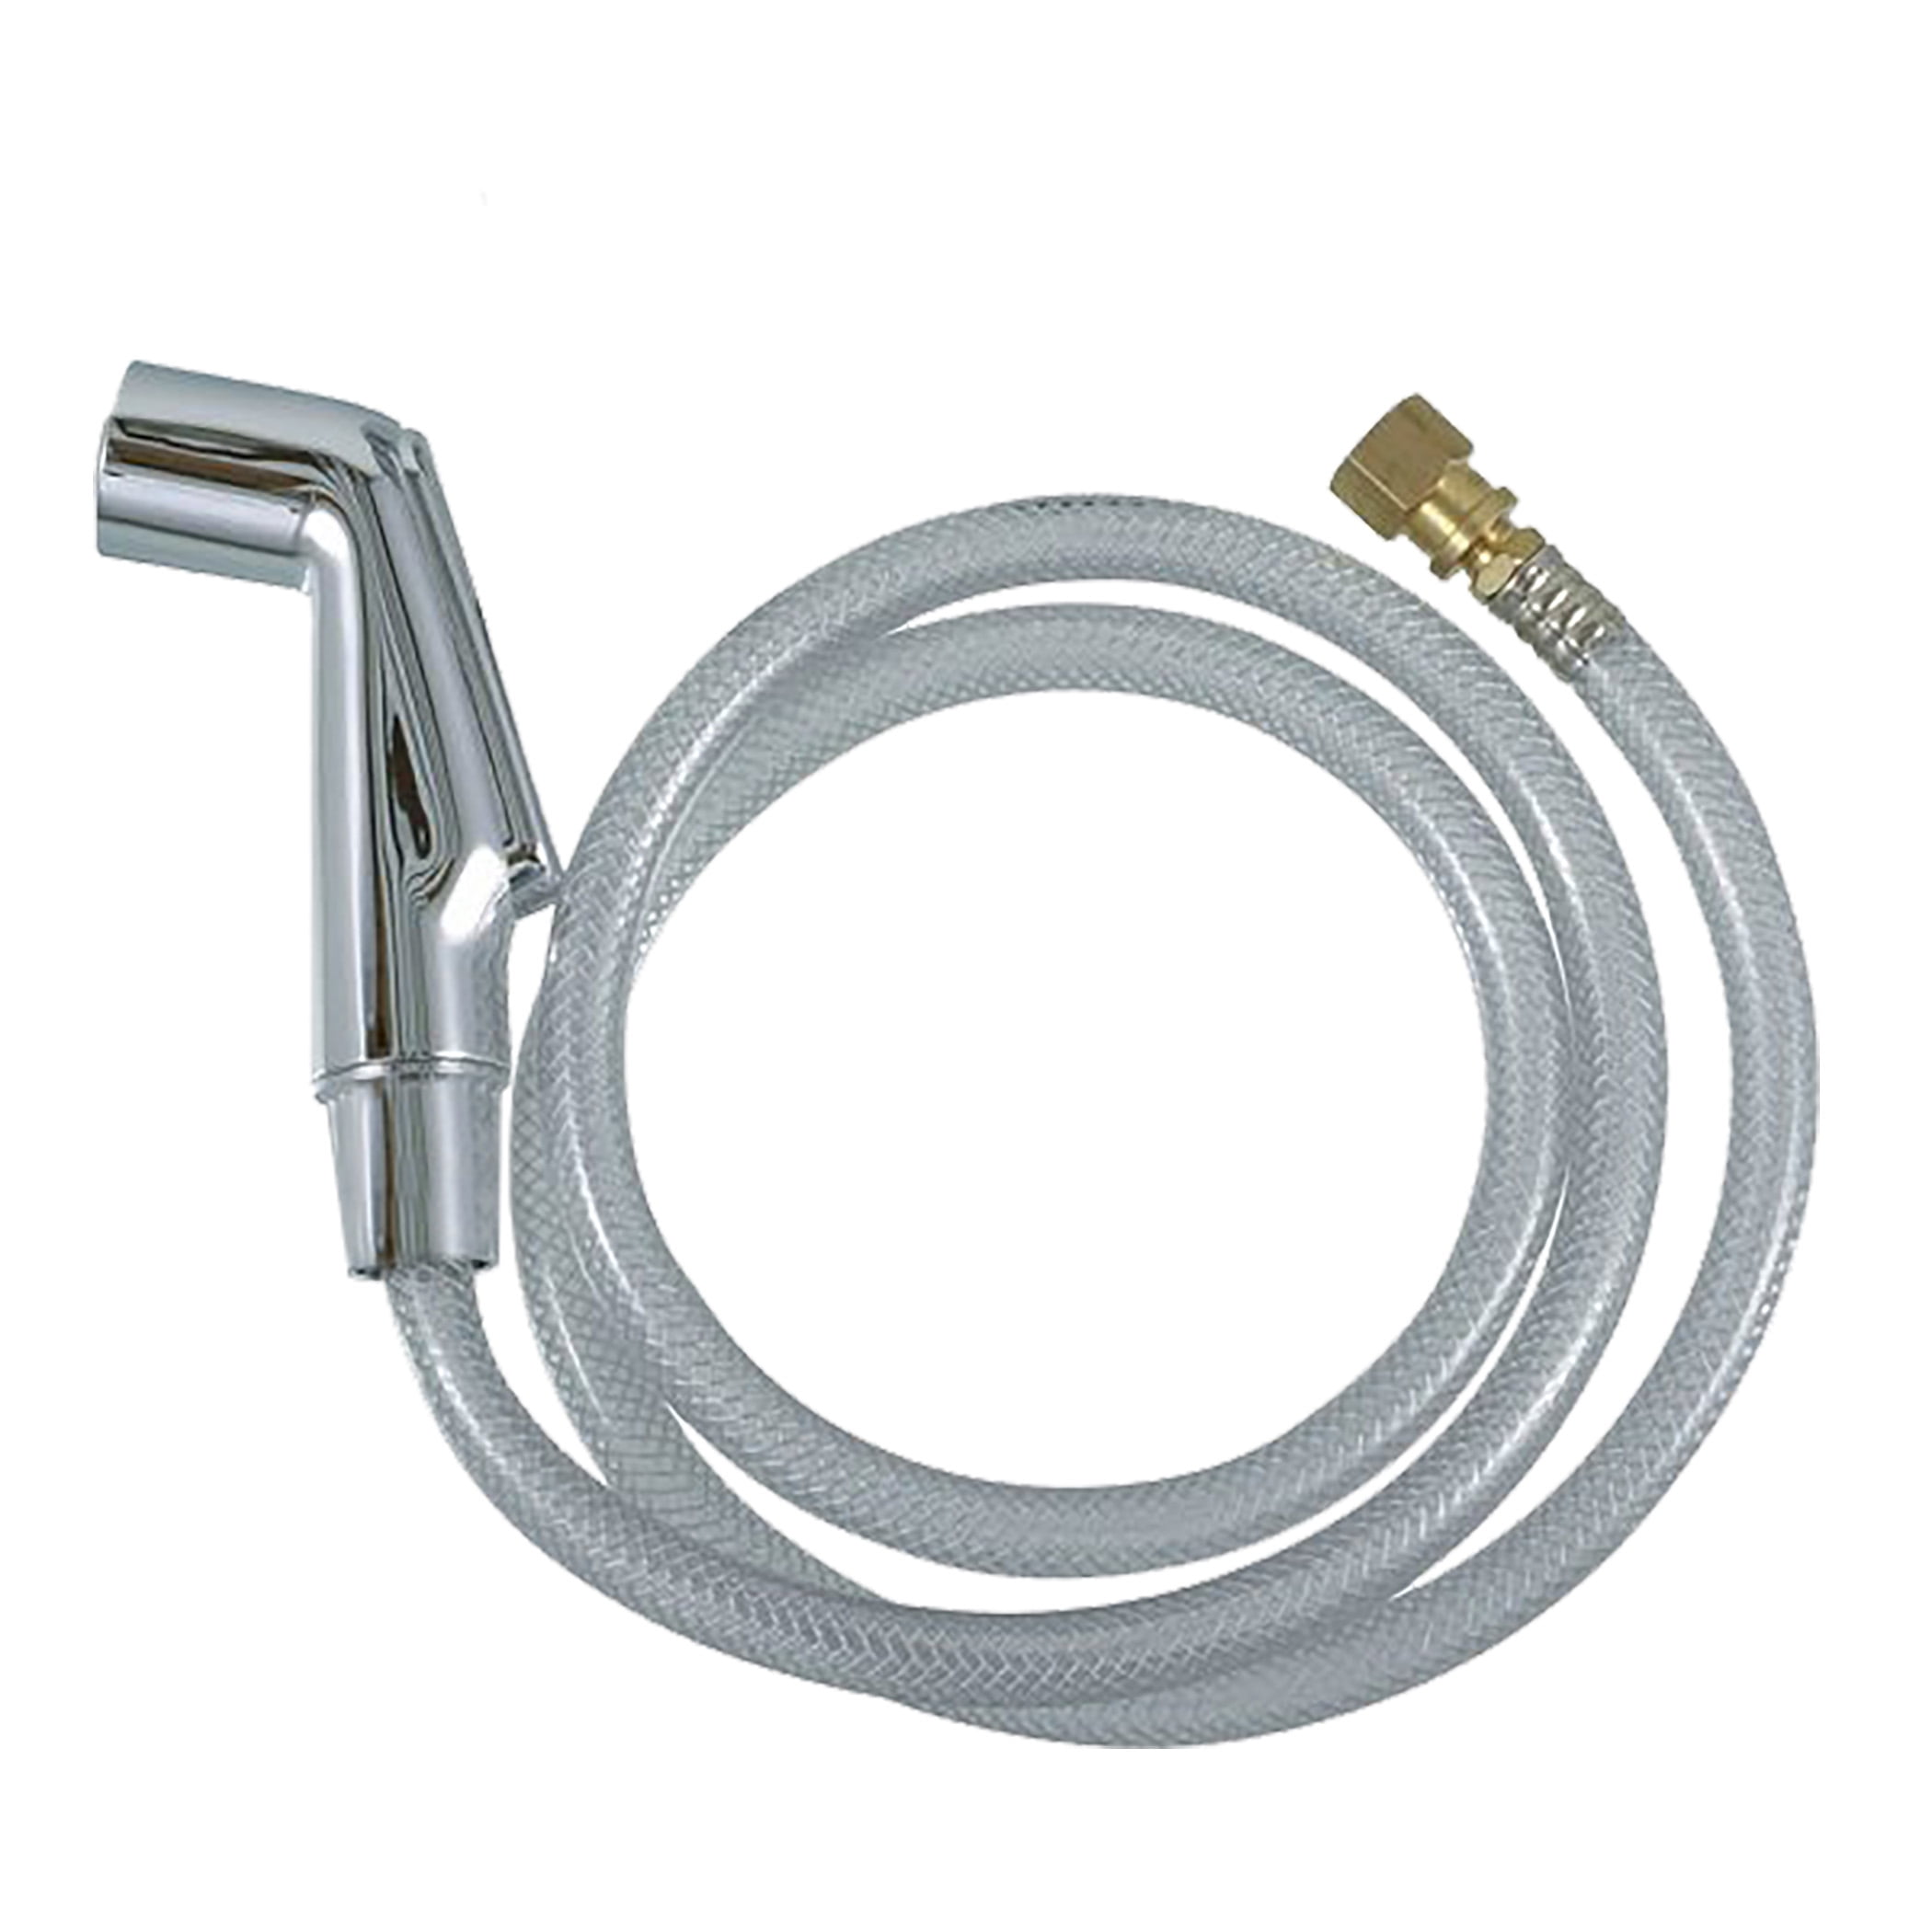 Mainstays Kitchen Sink Spray Hose and Head in Chrome (88814)